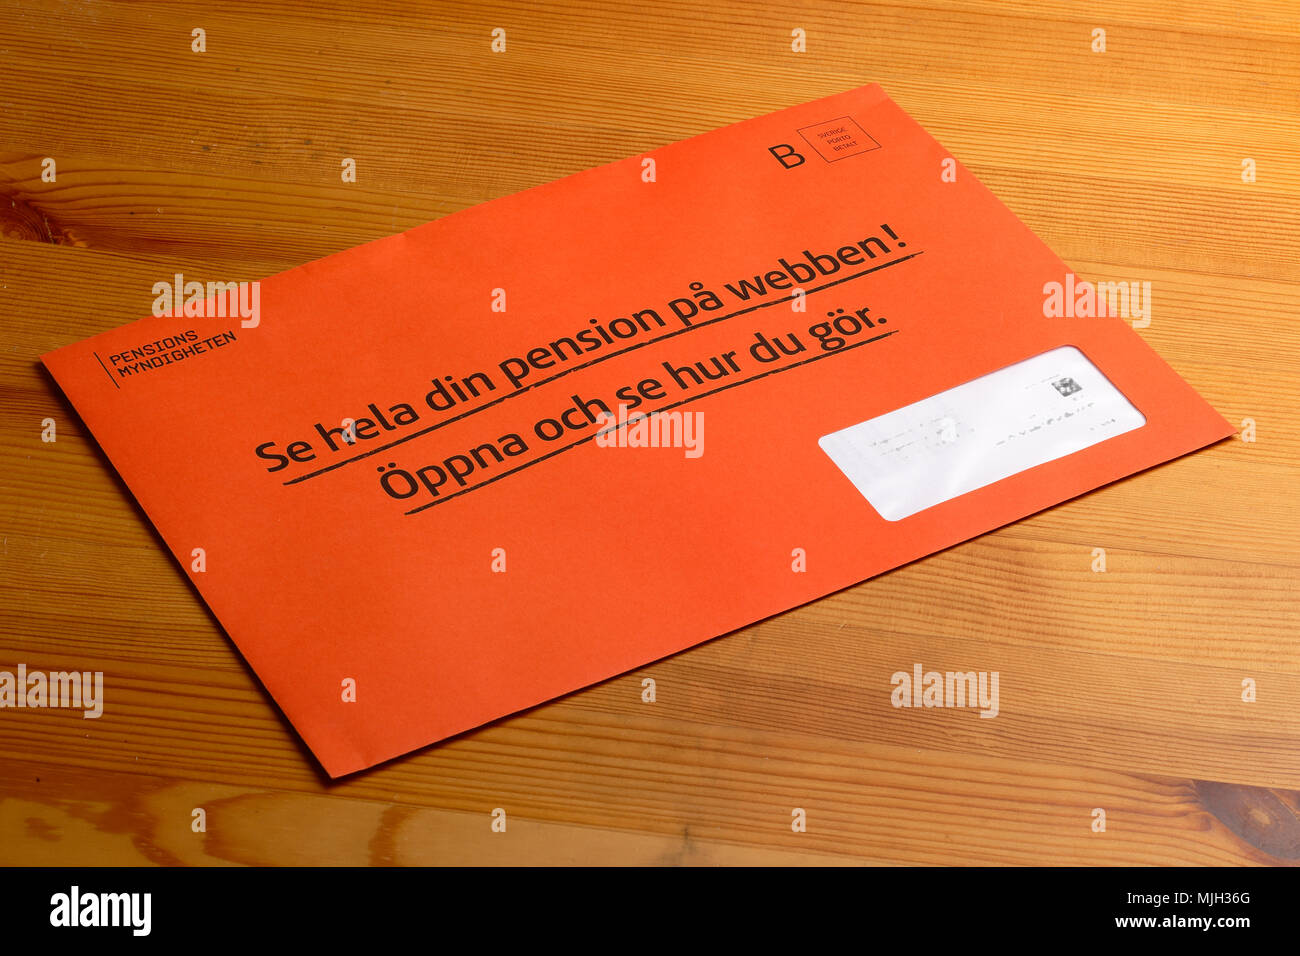 Stockholm, Sweden - March 3, 2017:The orange envelope from the Swedish Pensions Agency (Pensionsmyndigheten) containing the annual statement. Stock Photo